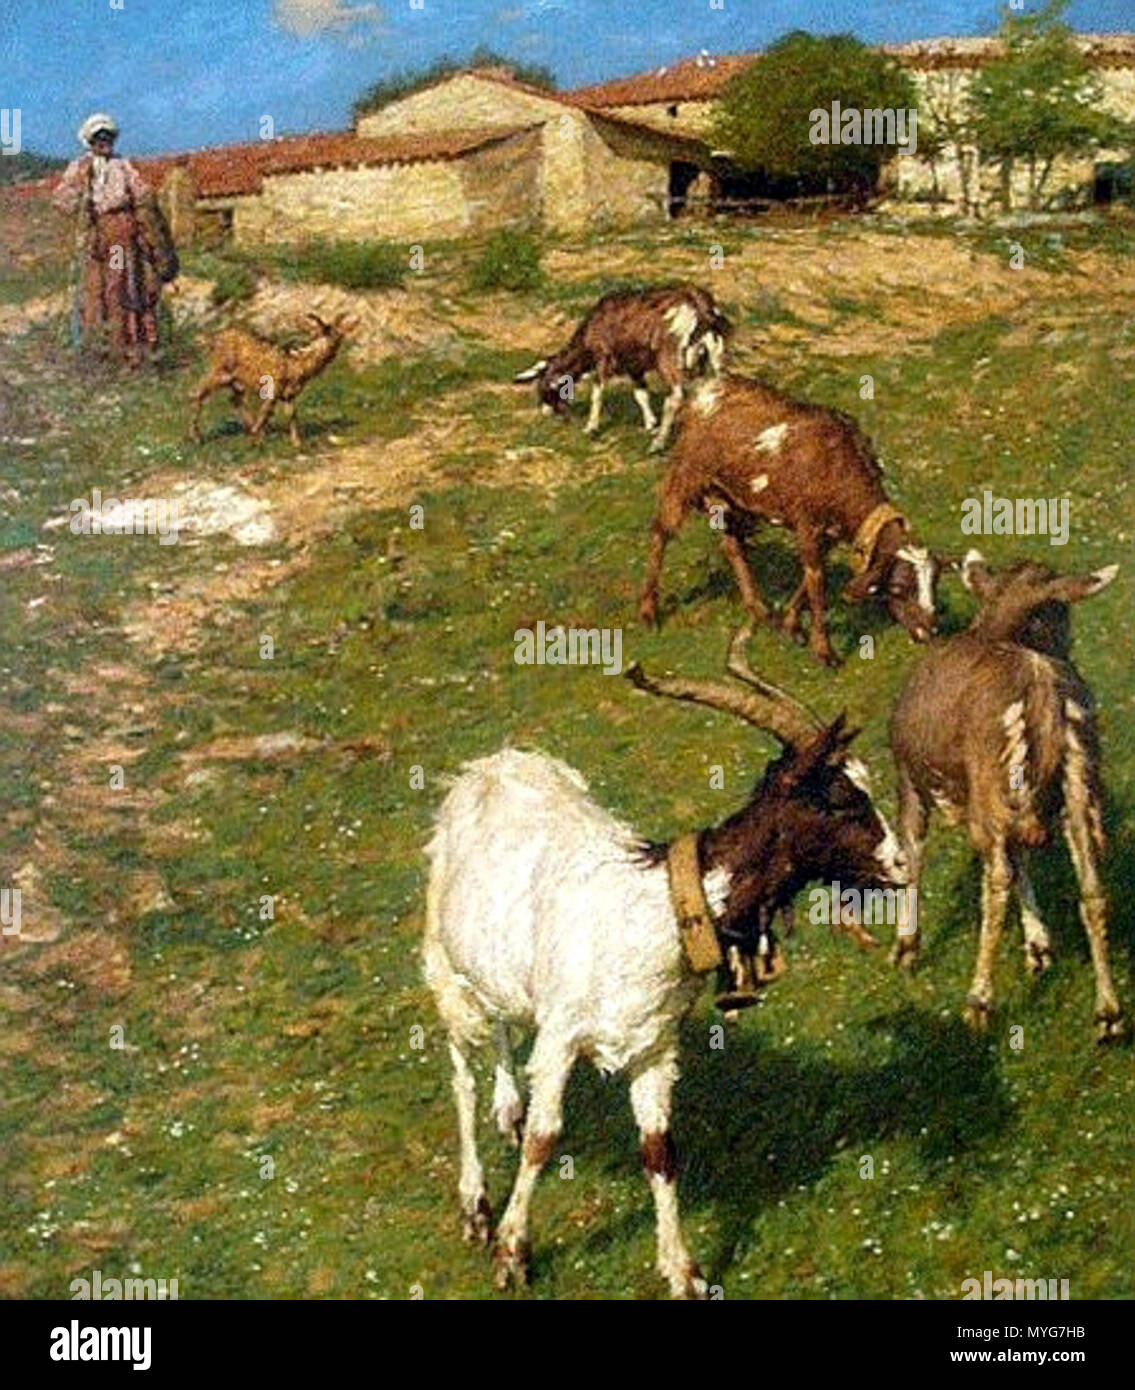 . Provencal Farm . Unknown date.    Henry Herbert La Thangue  (1859–1929)     Alternative names Henry Herbert LaThangue; Henry La Thangue; Henry Herbert la Thangue; Henry Herbert Lathangue; La Thangue  Description English painter Realist painter and associated with the Newlyn School  Date of birth/death 19 September 1859 21 December 1929  Location of birth/death London London  Work location Bretagne, London, Category:Norfolk  Authority control  : Q1606851 VIAF: 25469415 ISNI: 0000 0000 6681 1384 ULAN: 500004645 LCCN: n89654016 WGA: LA THANGUE, Henry Herbert WorldCat 236 Henry Herbert La Thangu Stock Photo